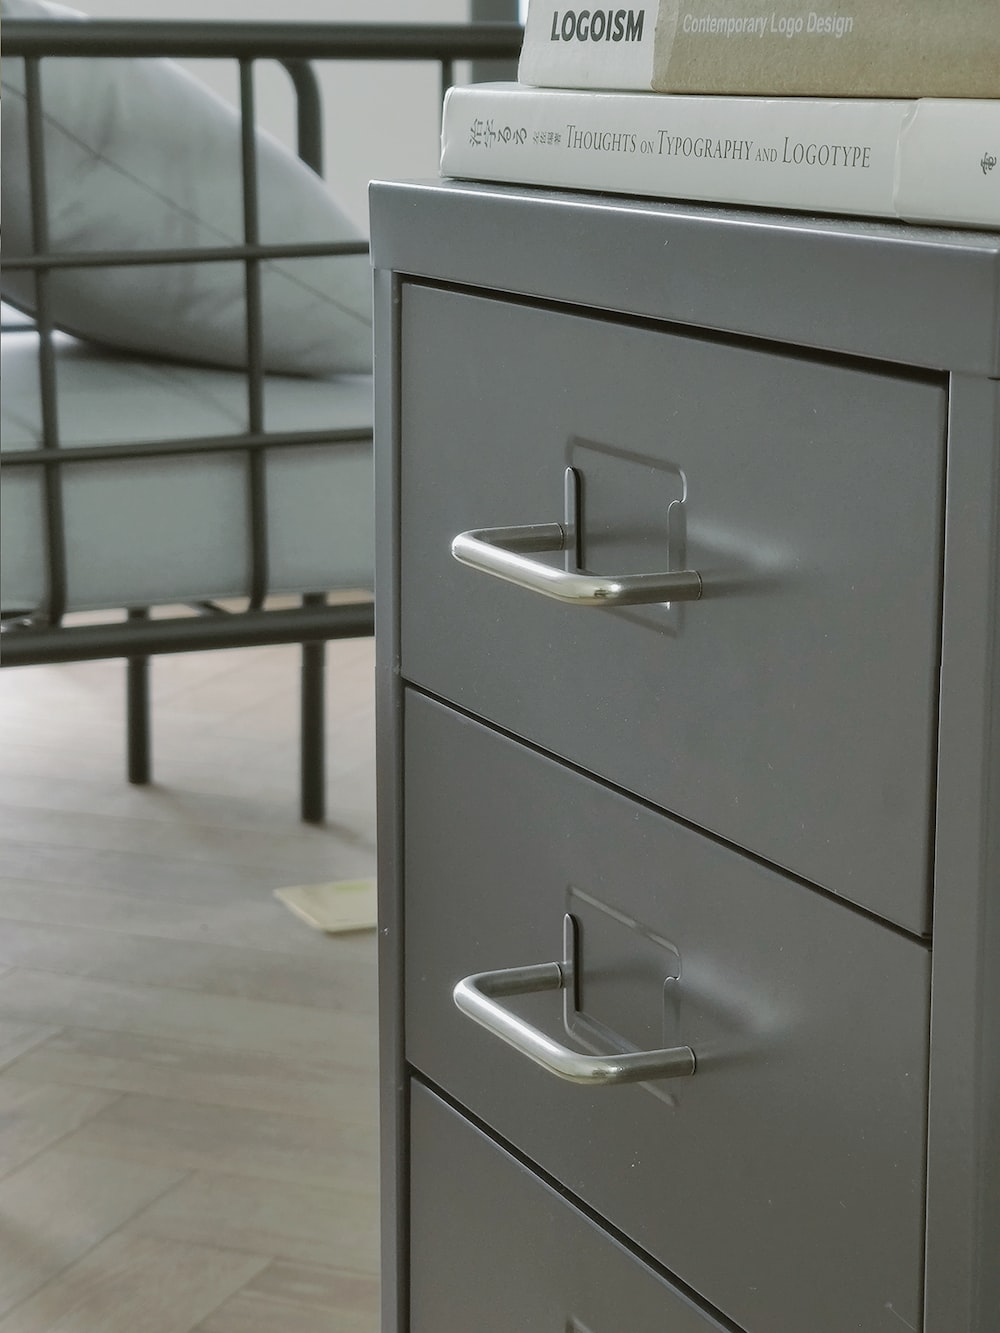 How do lateral file cabinets work?